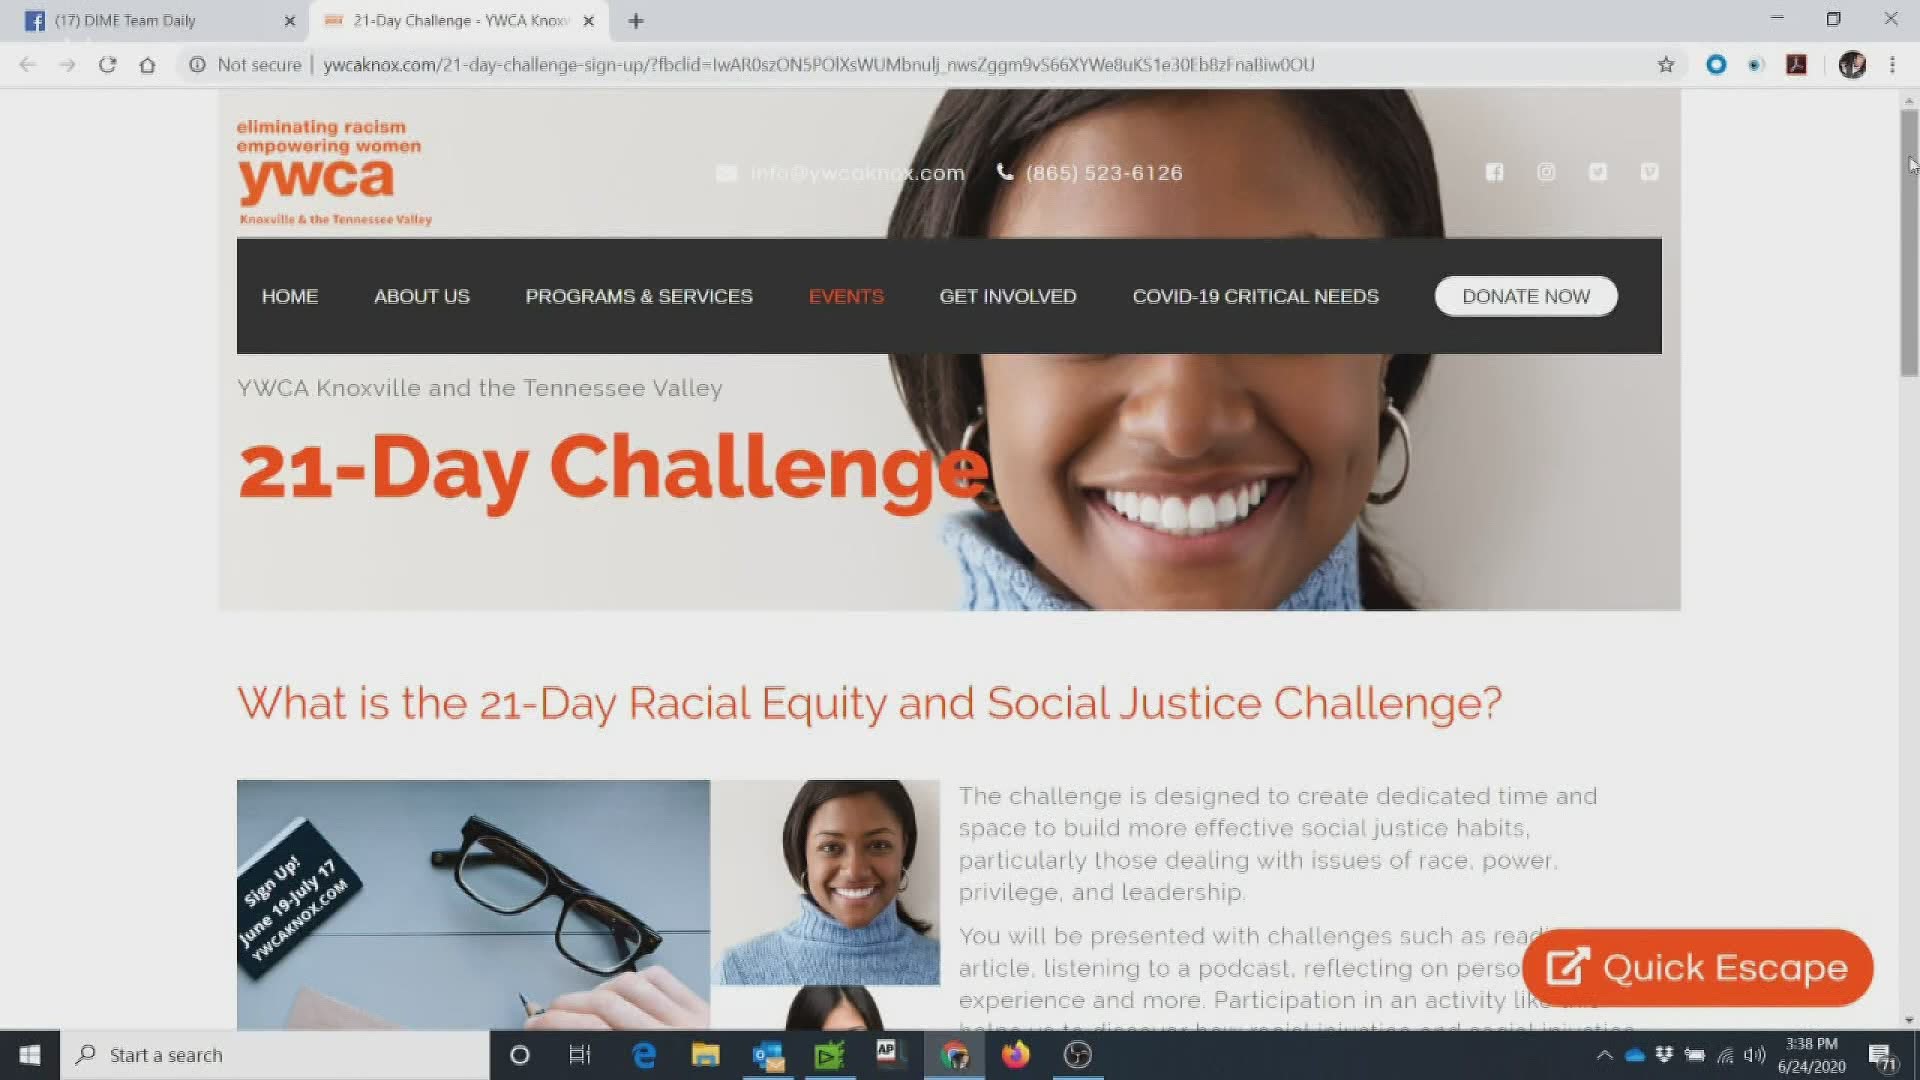 Every day, people taking part receive a challenge in an email that focuses on anti-racism work and how they can help dismantle racism in their communities.